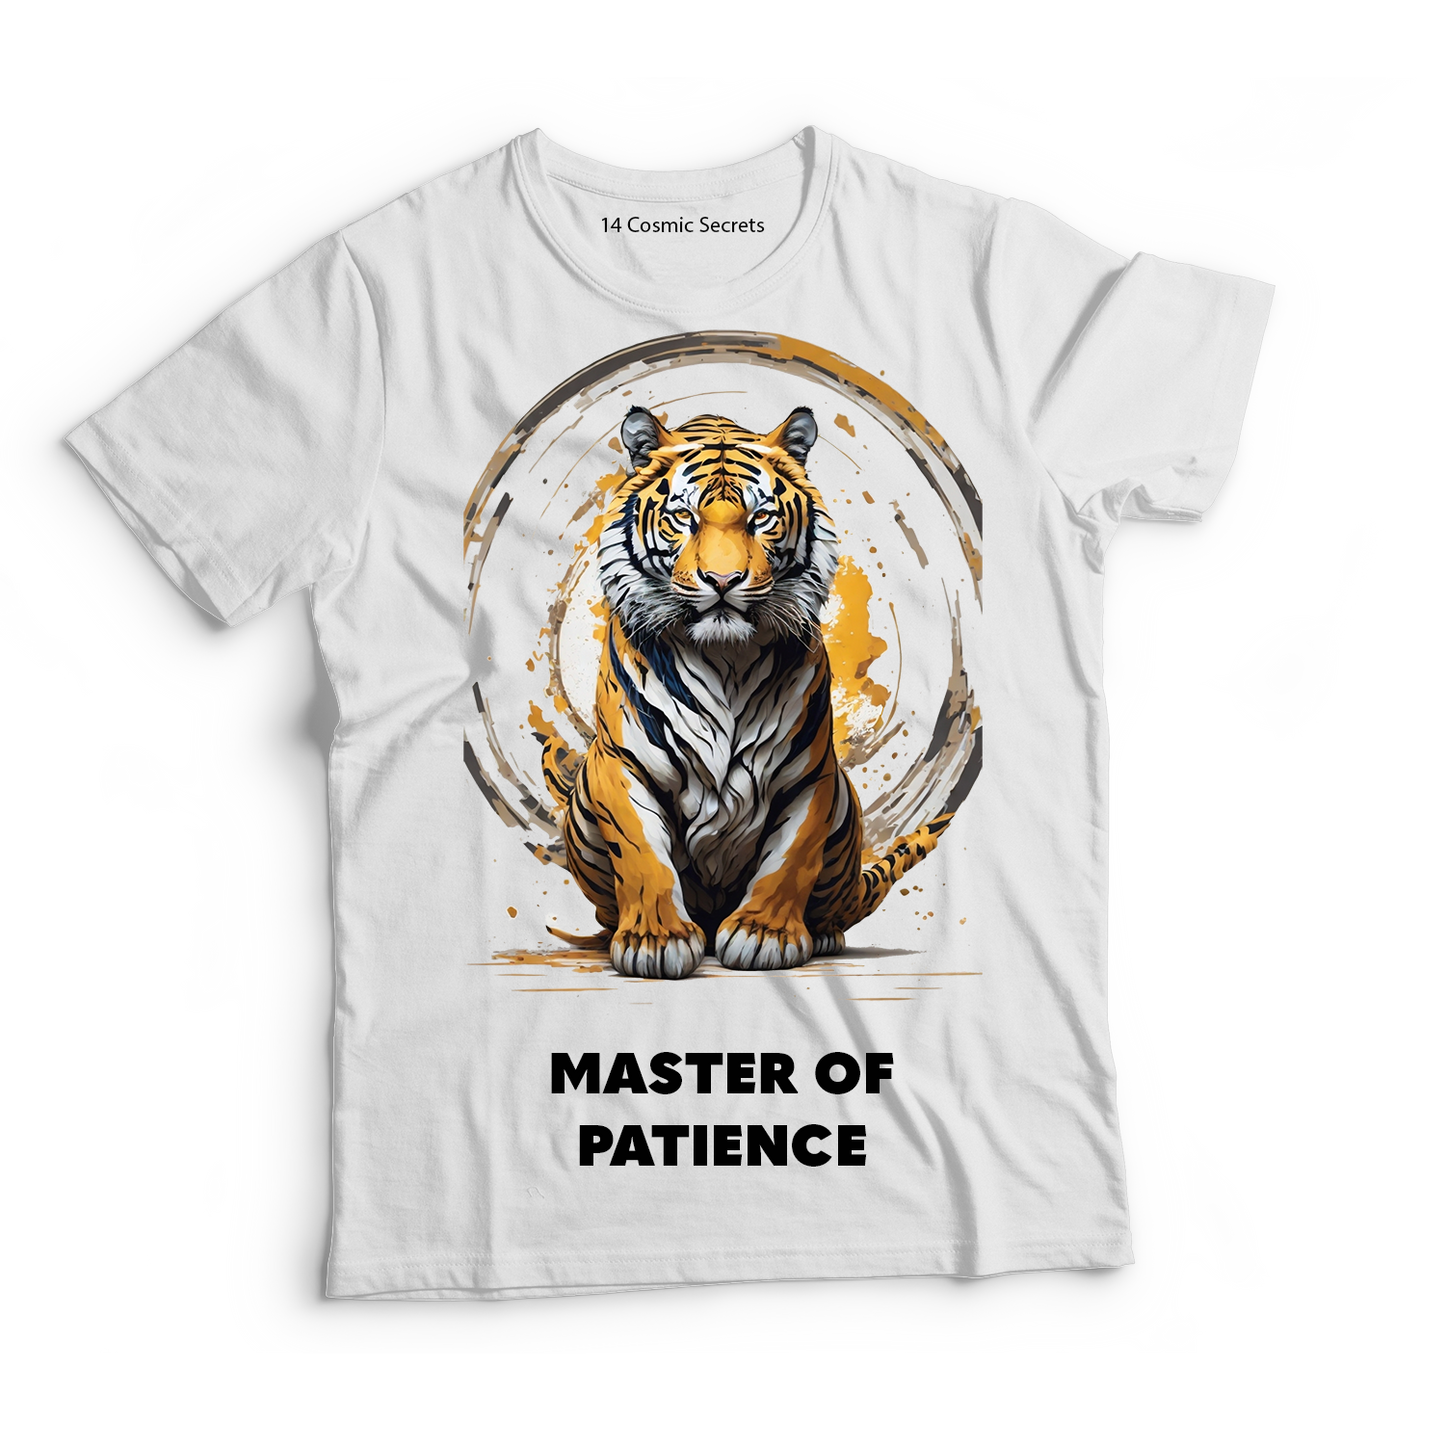 Master of Patience Graphic Printed T-Shirt  Cotton T-Shirt Magnificence of India T-Shirt